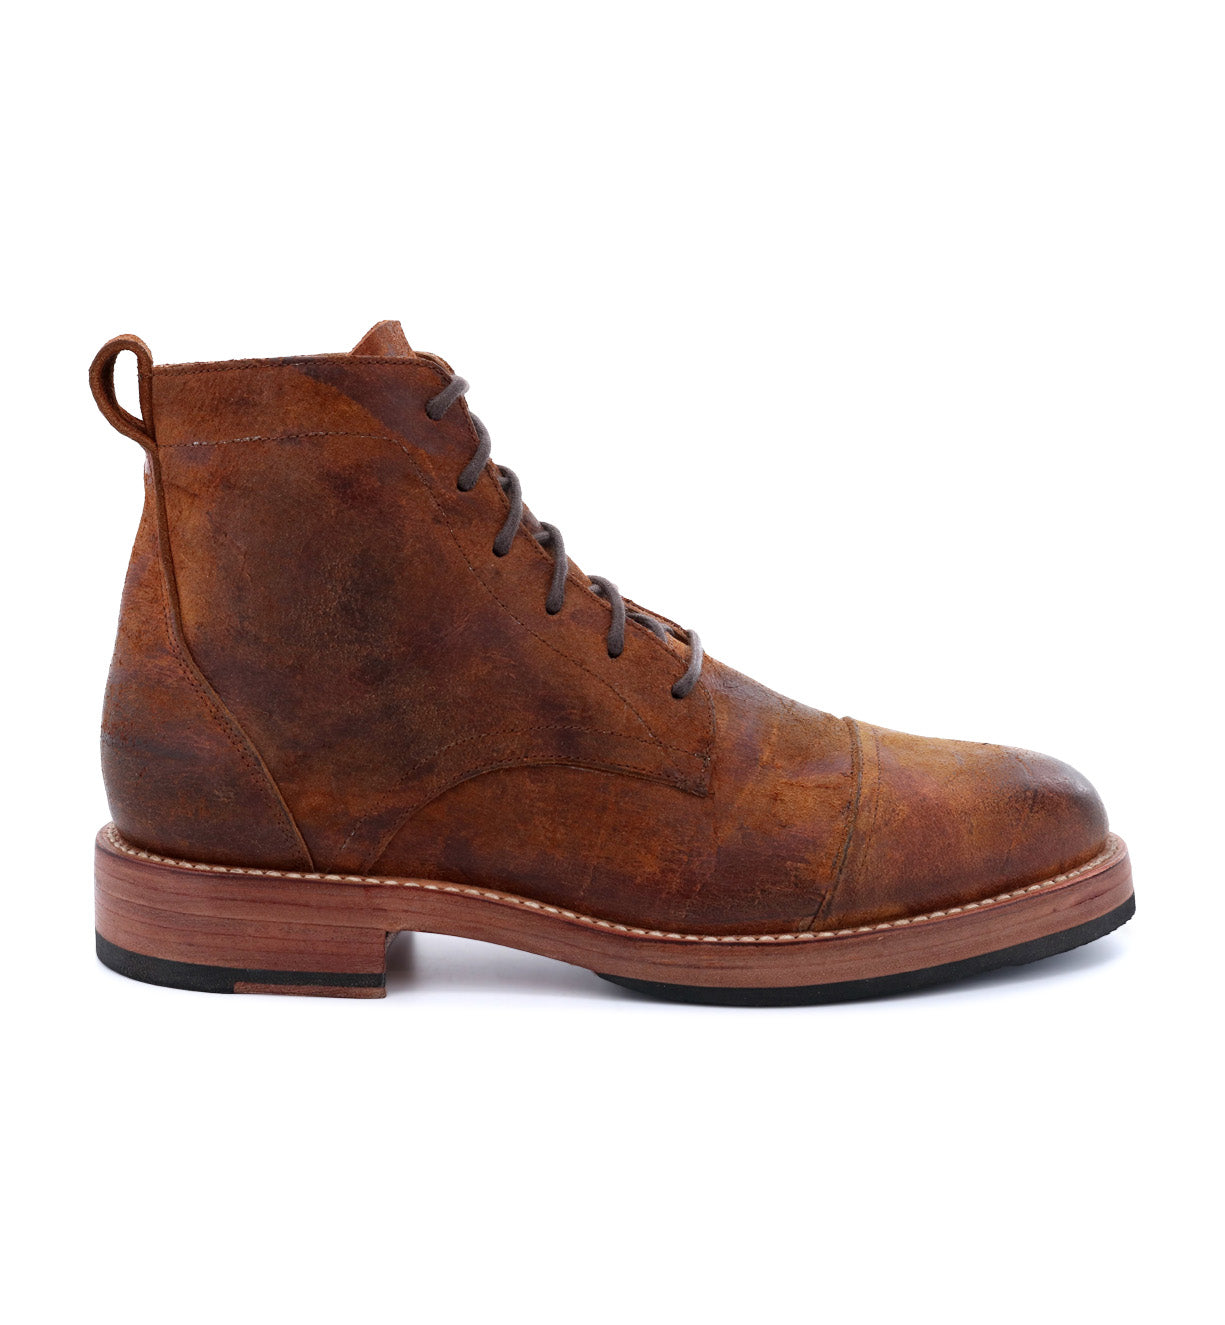 The men's brown leather Larry boot from the Santa Rosa Brand collection is shown on a white background.